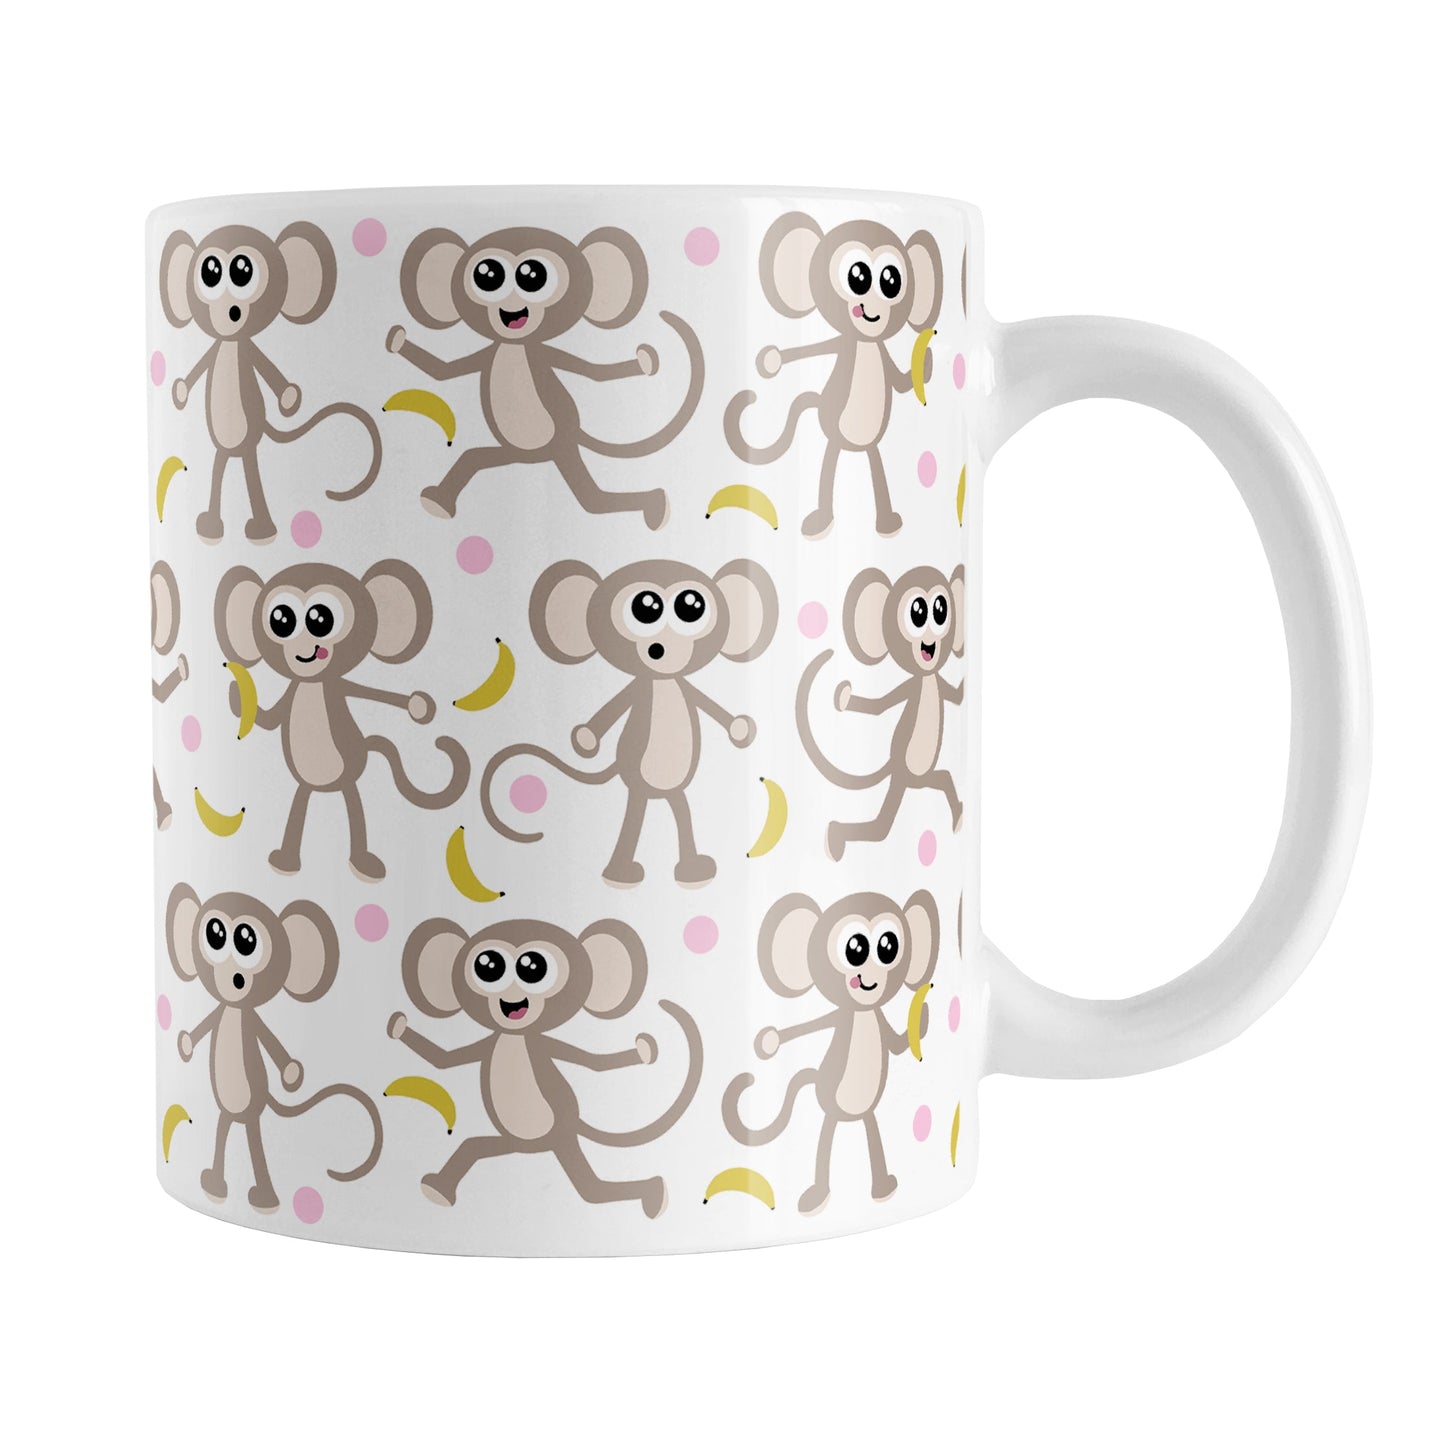 Cute Monkey Pattern with Pink Dots Mug (11oz) at Amy's Coffee Mugs. A ceramic coffee mug is designed with an adorable pattern of monkeys having fun, complete with bananas and pink dots, that wraps around the mug.